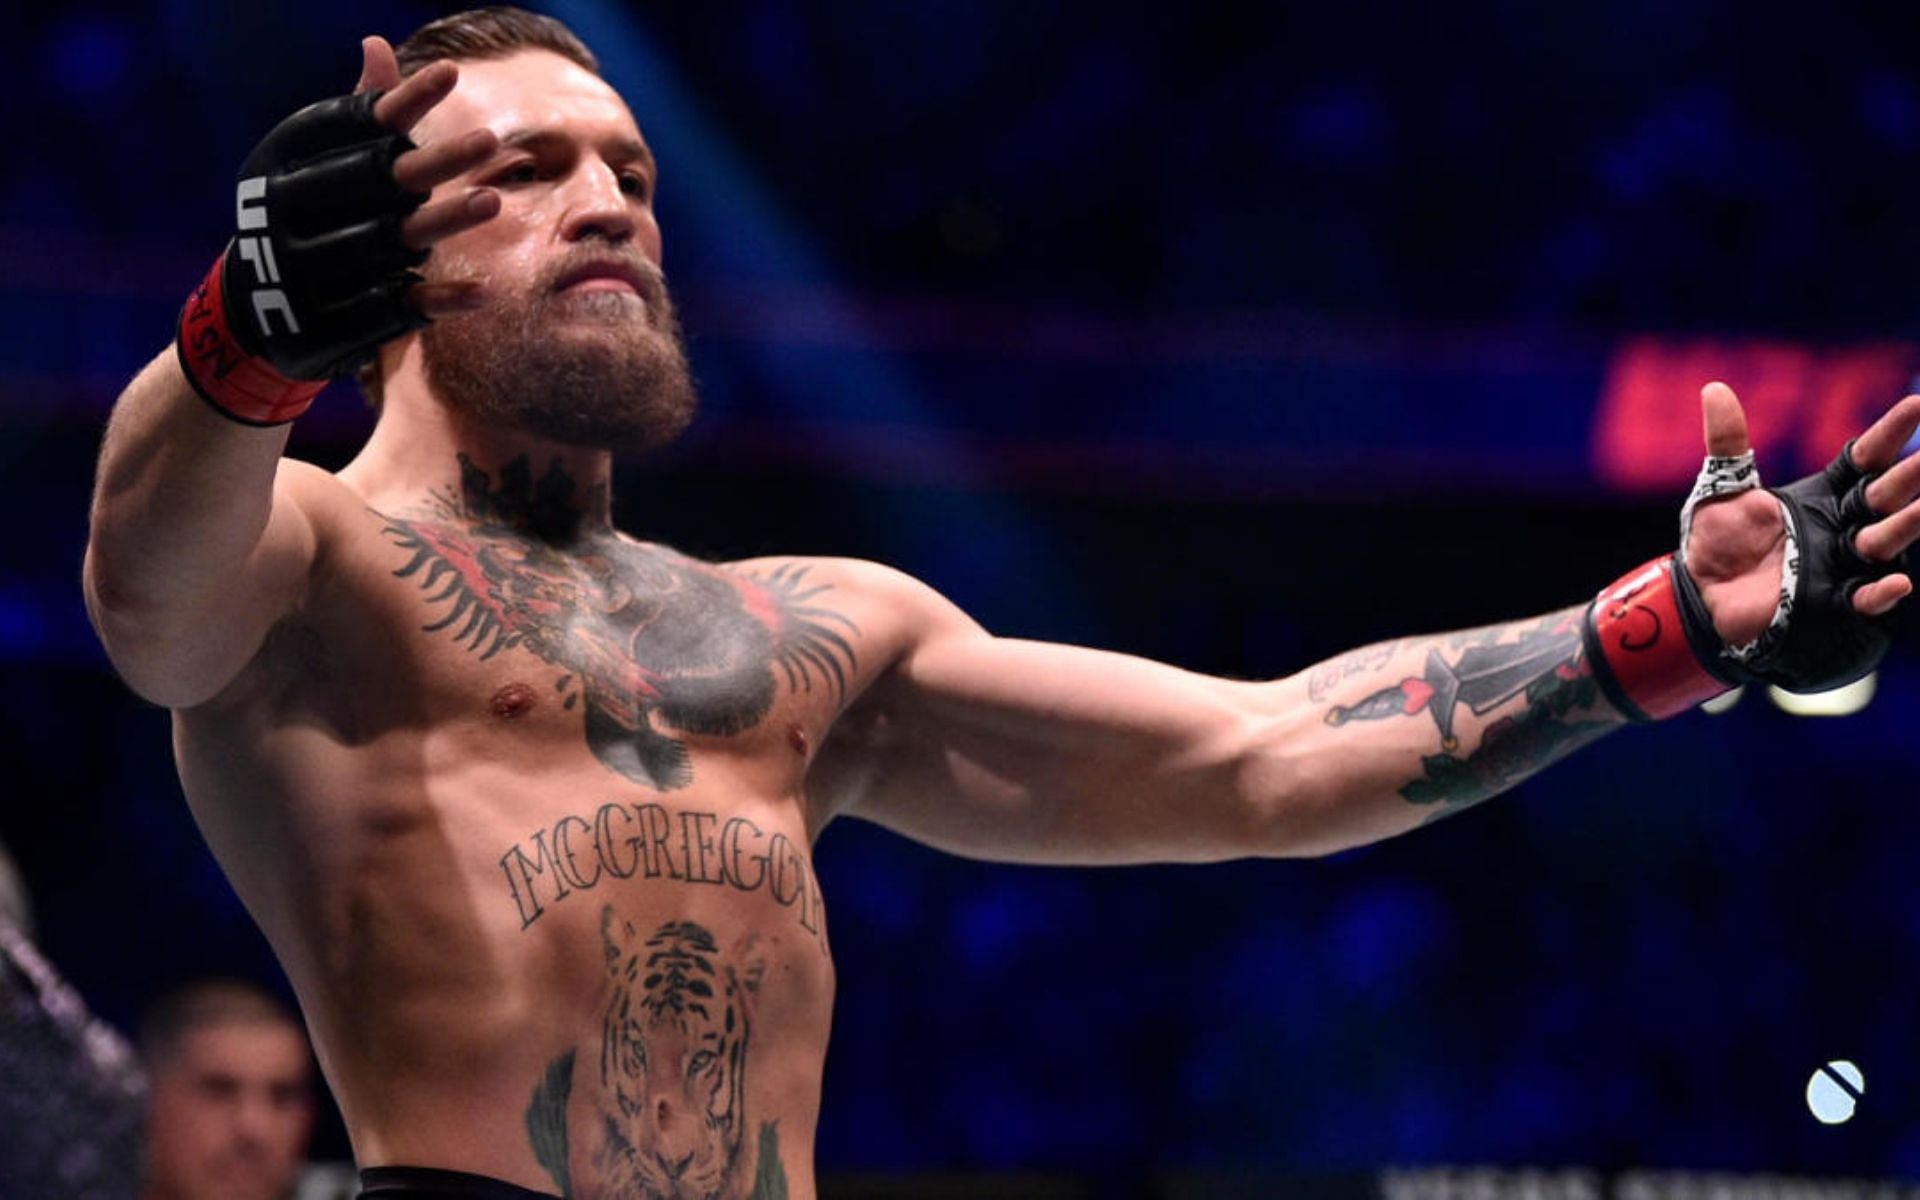 In the eyes of UFC fans, Conor McGregor is a largely divisive figure